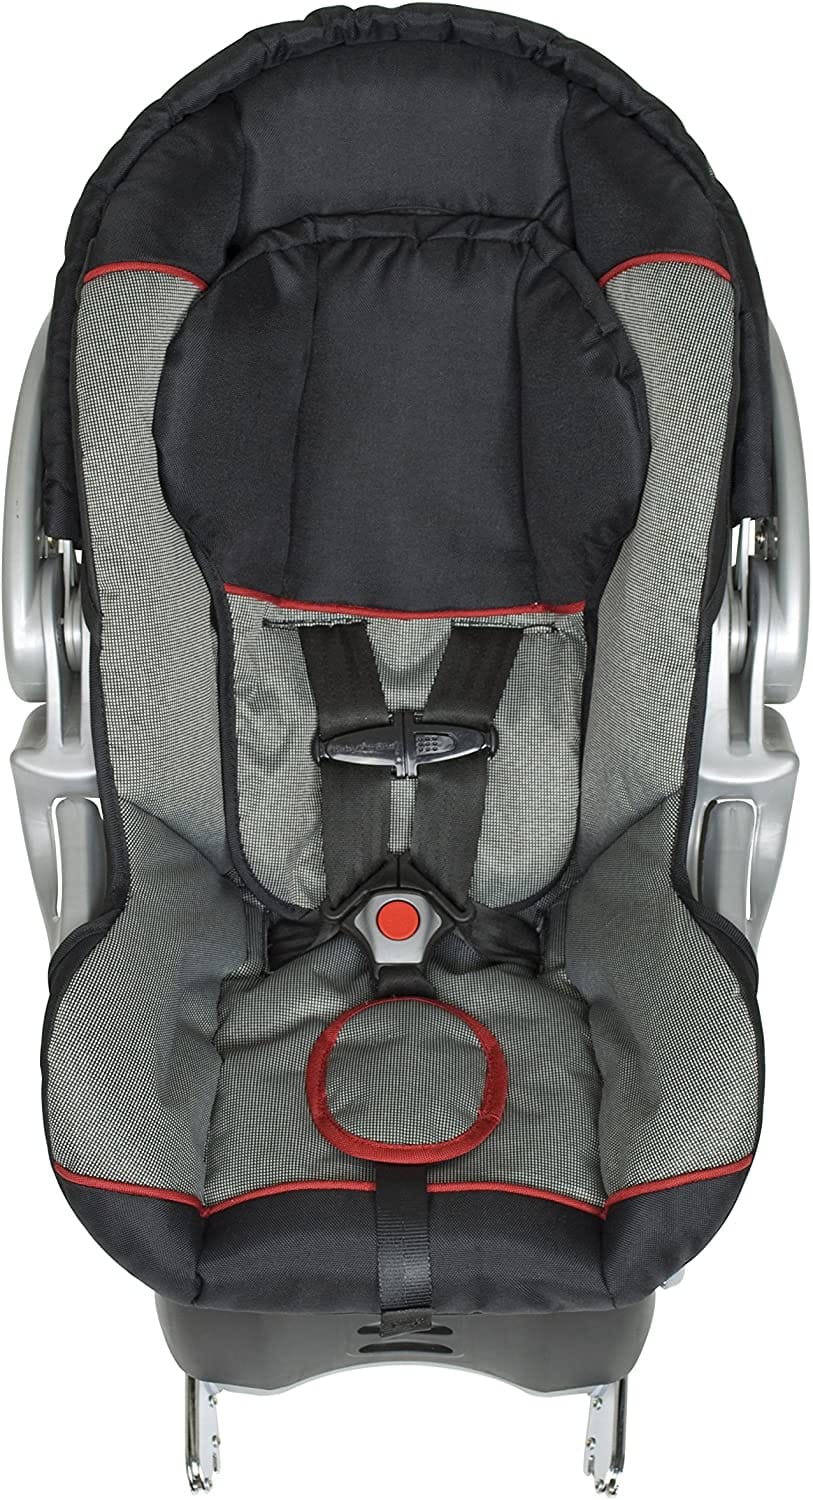 Baby Trend Flex-loc Infant Car Seat Millennium: It is designed with a five-point safety harness so your little one will remain safe and secure in this toddler car seat - CS31773